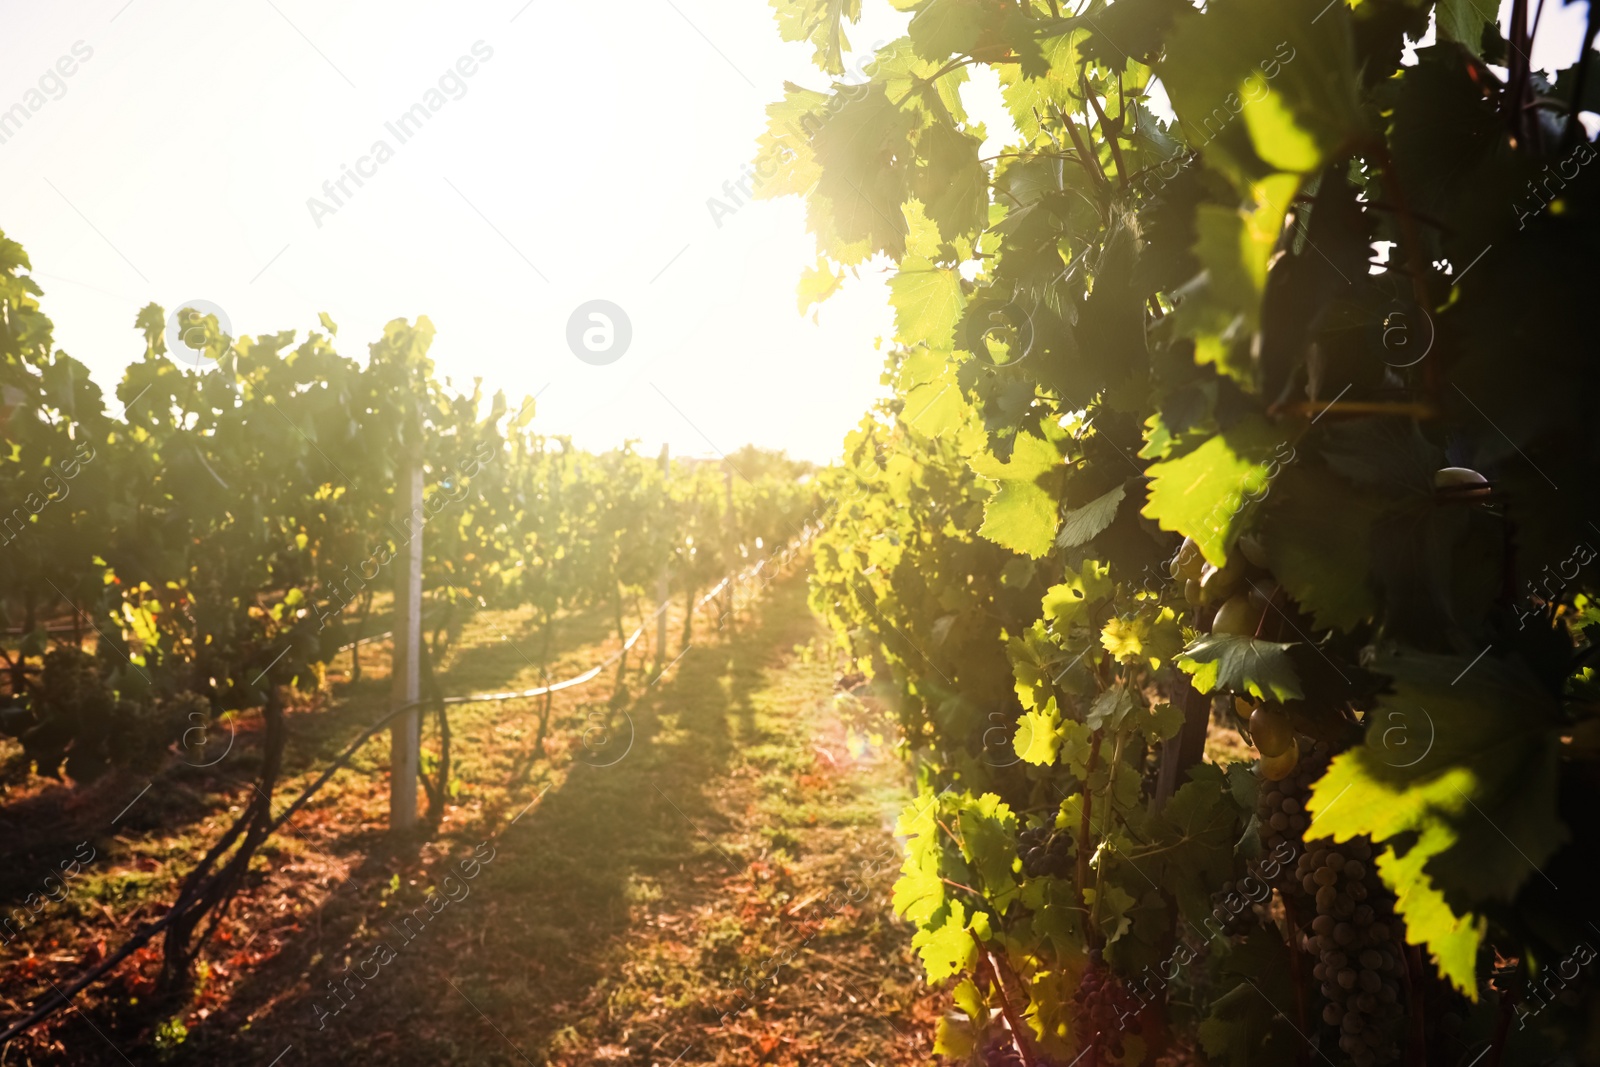 Photo of Beautiful view of vineyard with ripe grapes